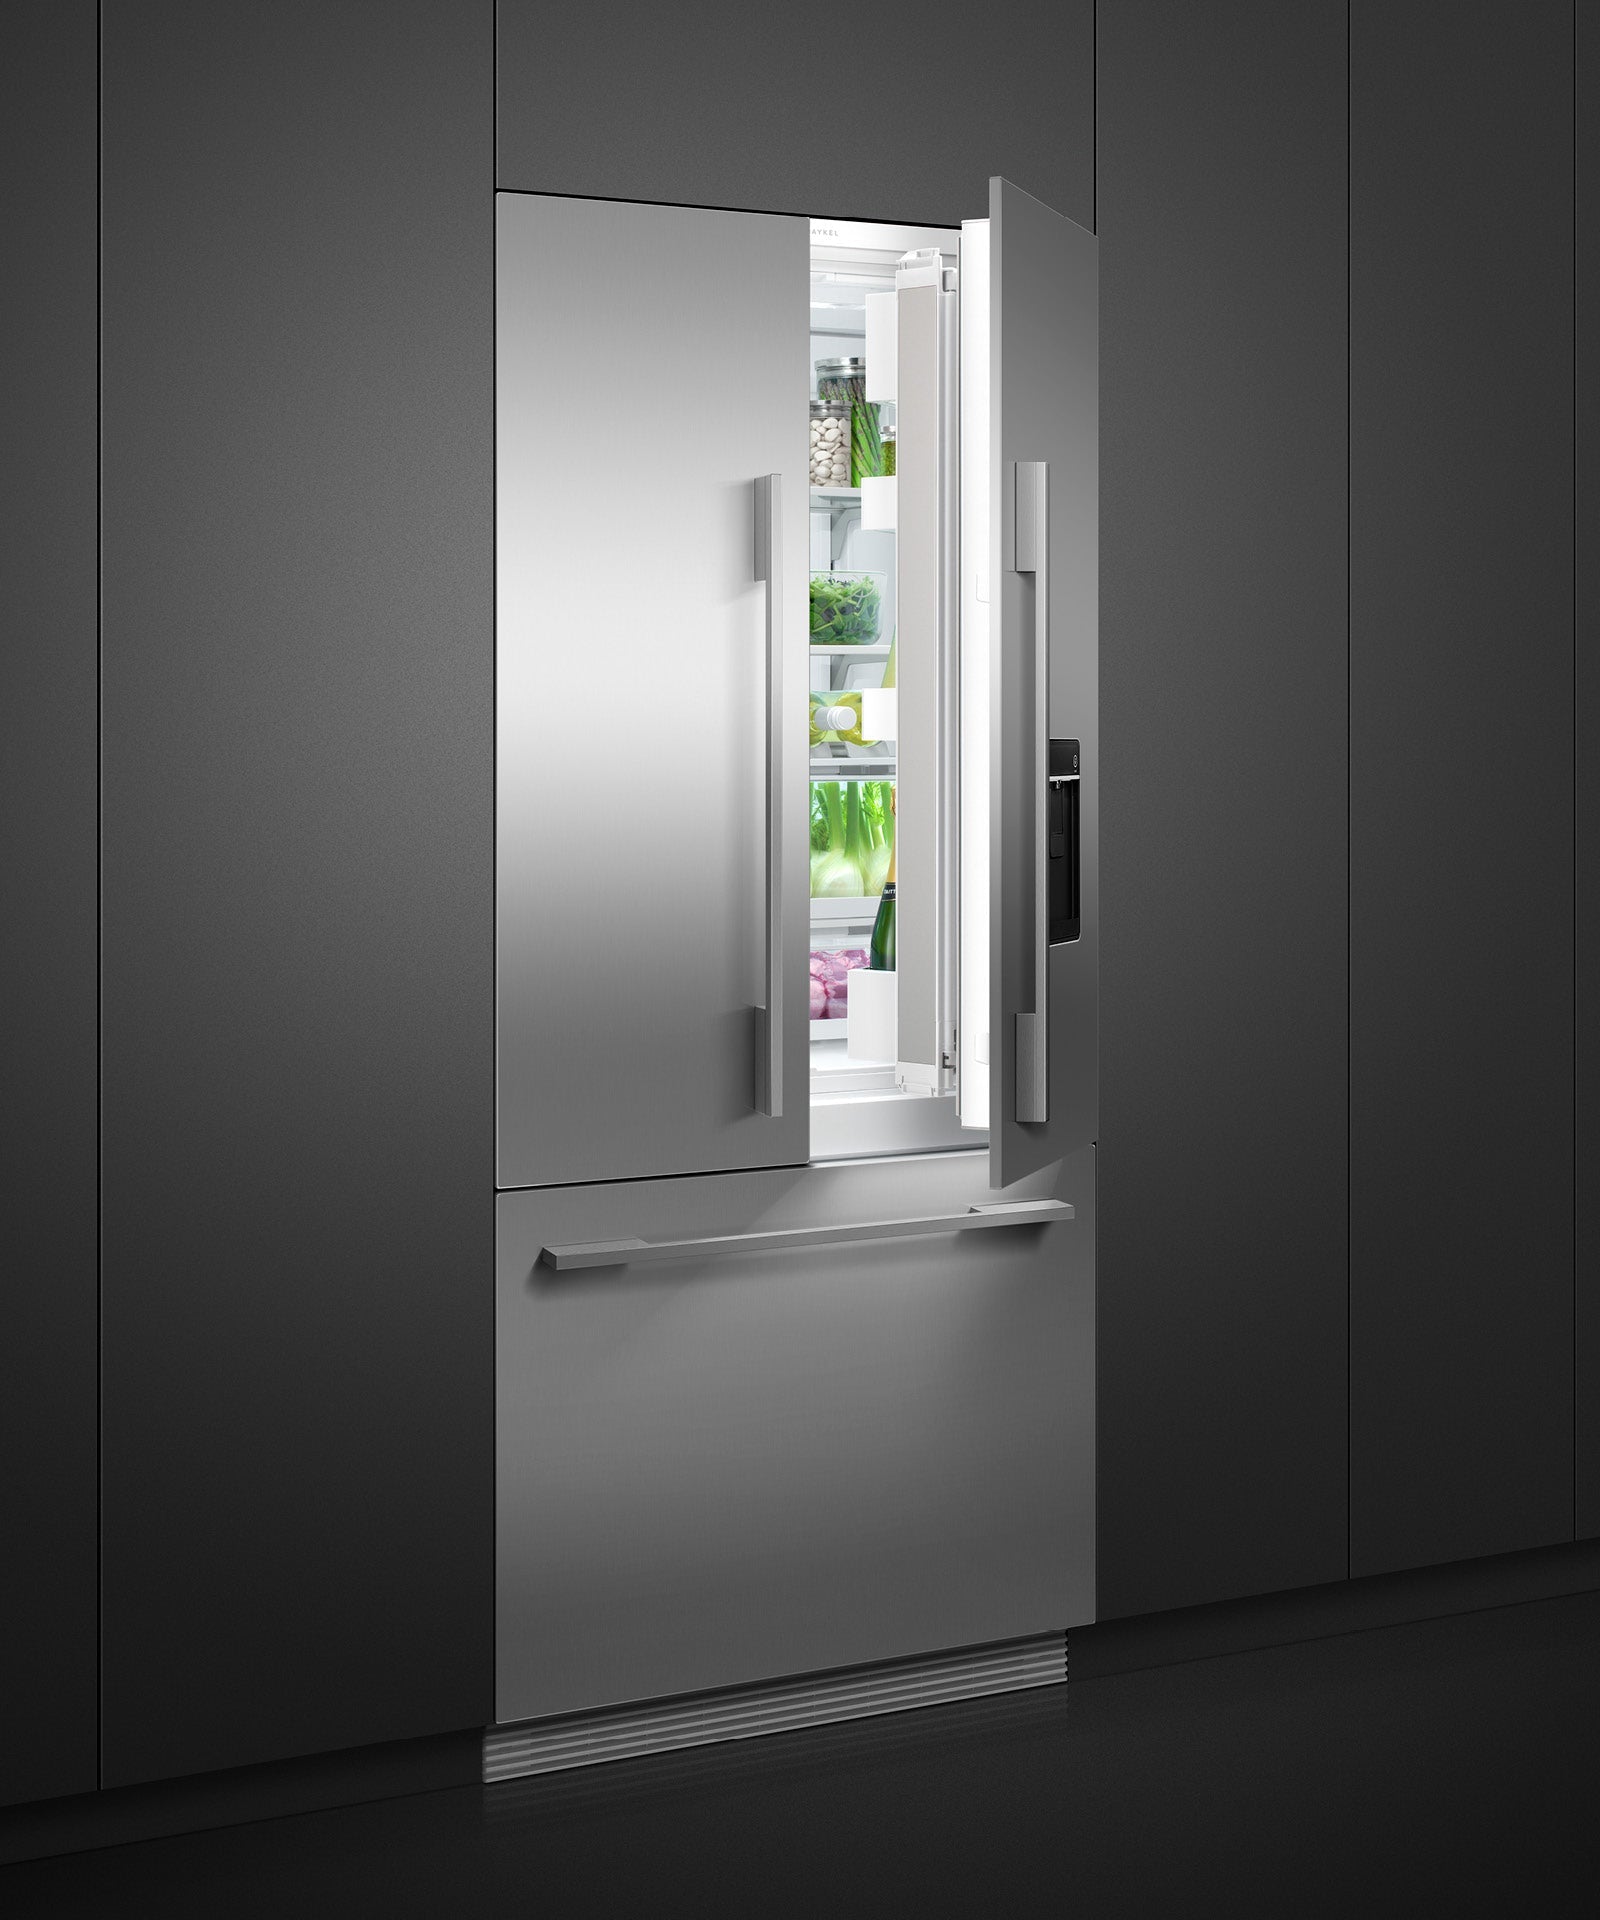 Integrated French Door Refrigerator Freezer, 32", Ice & Water, pdp